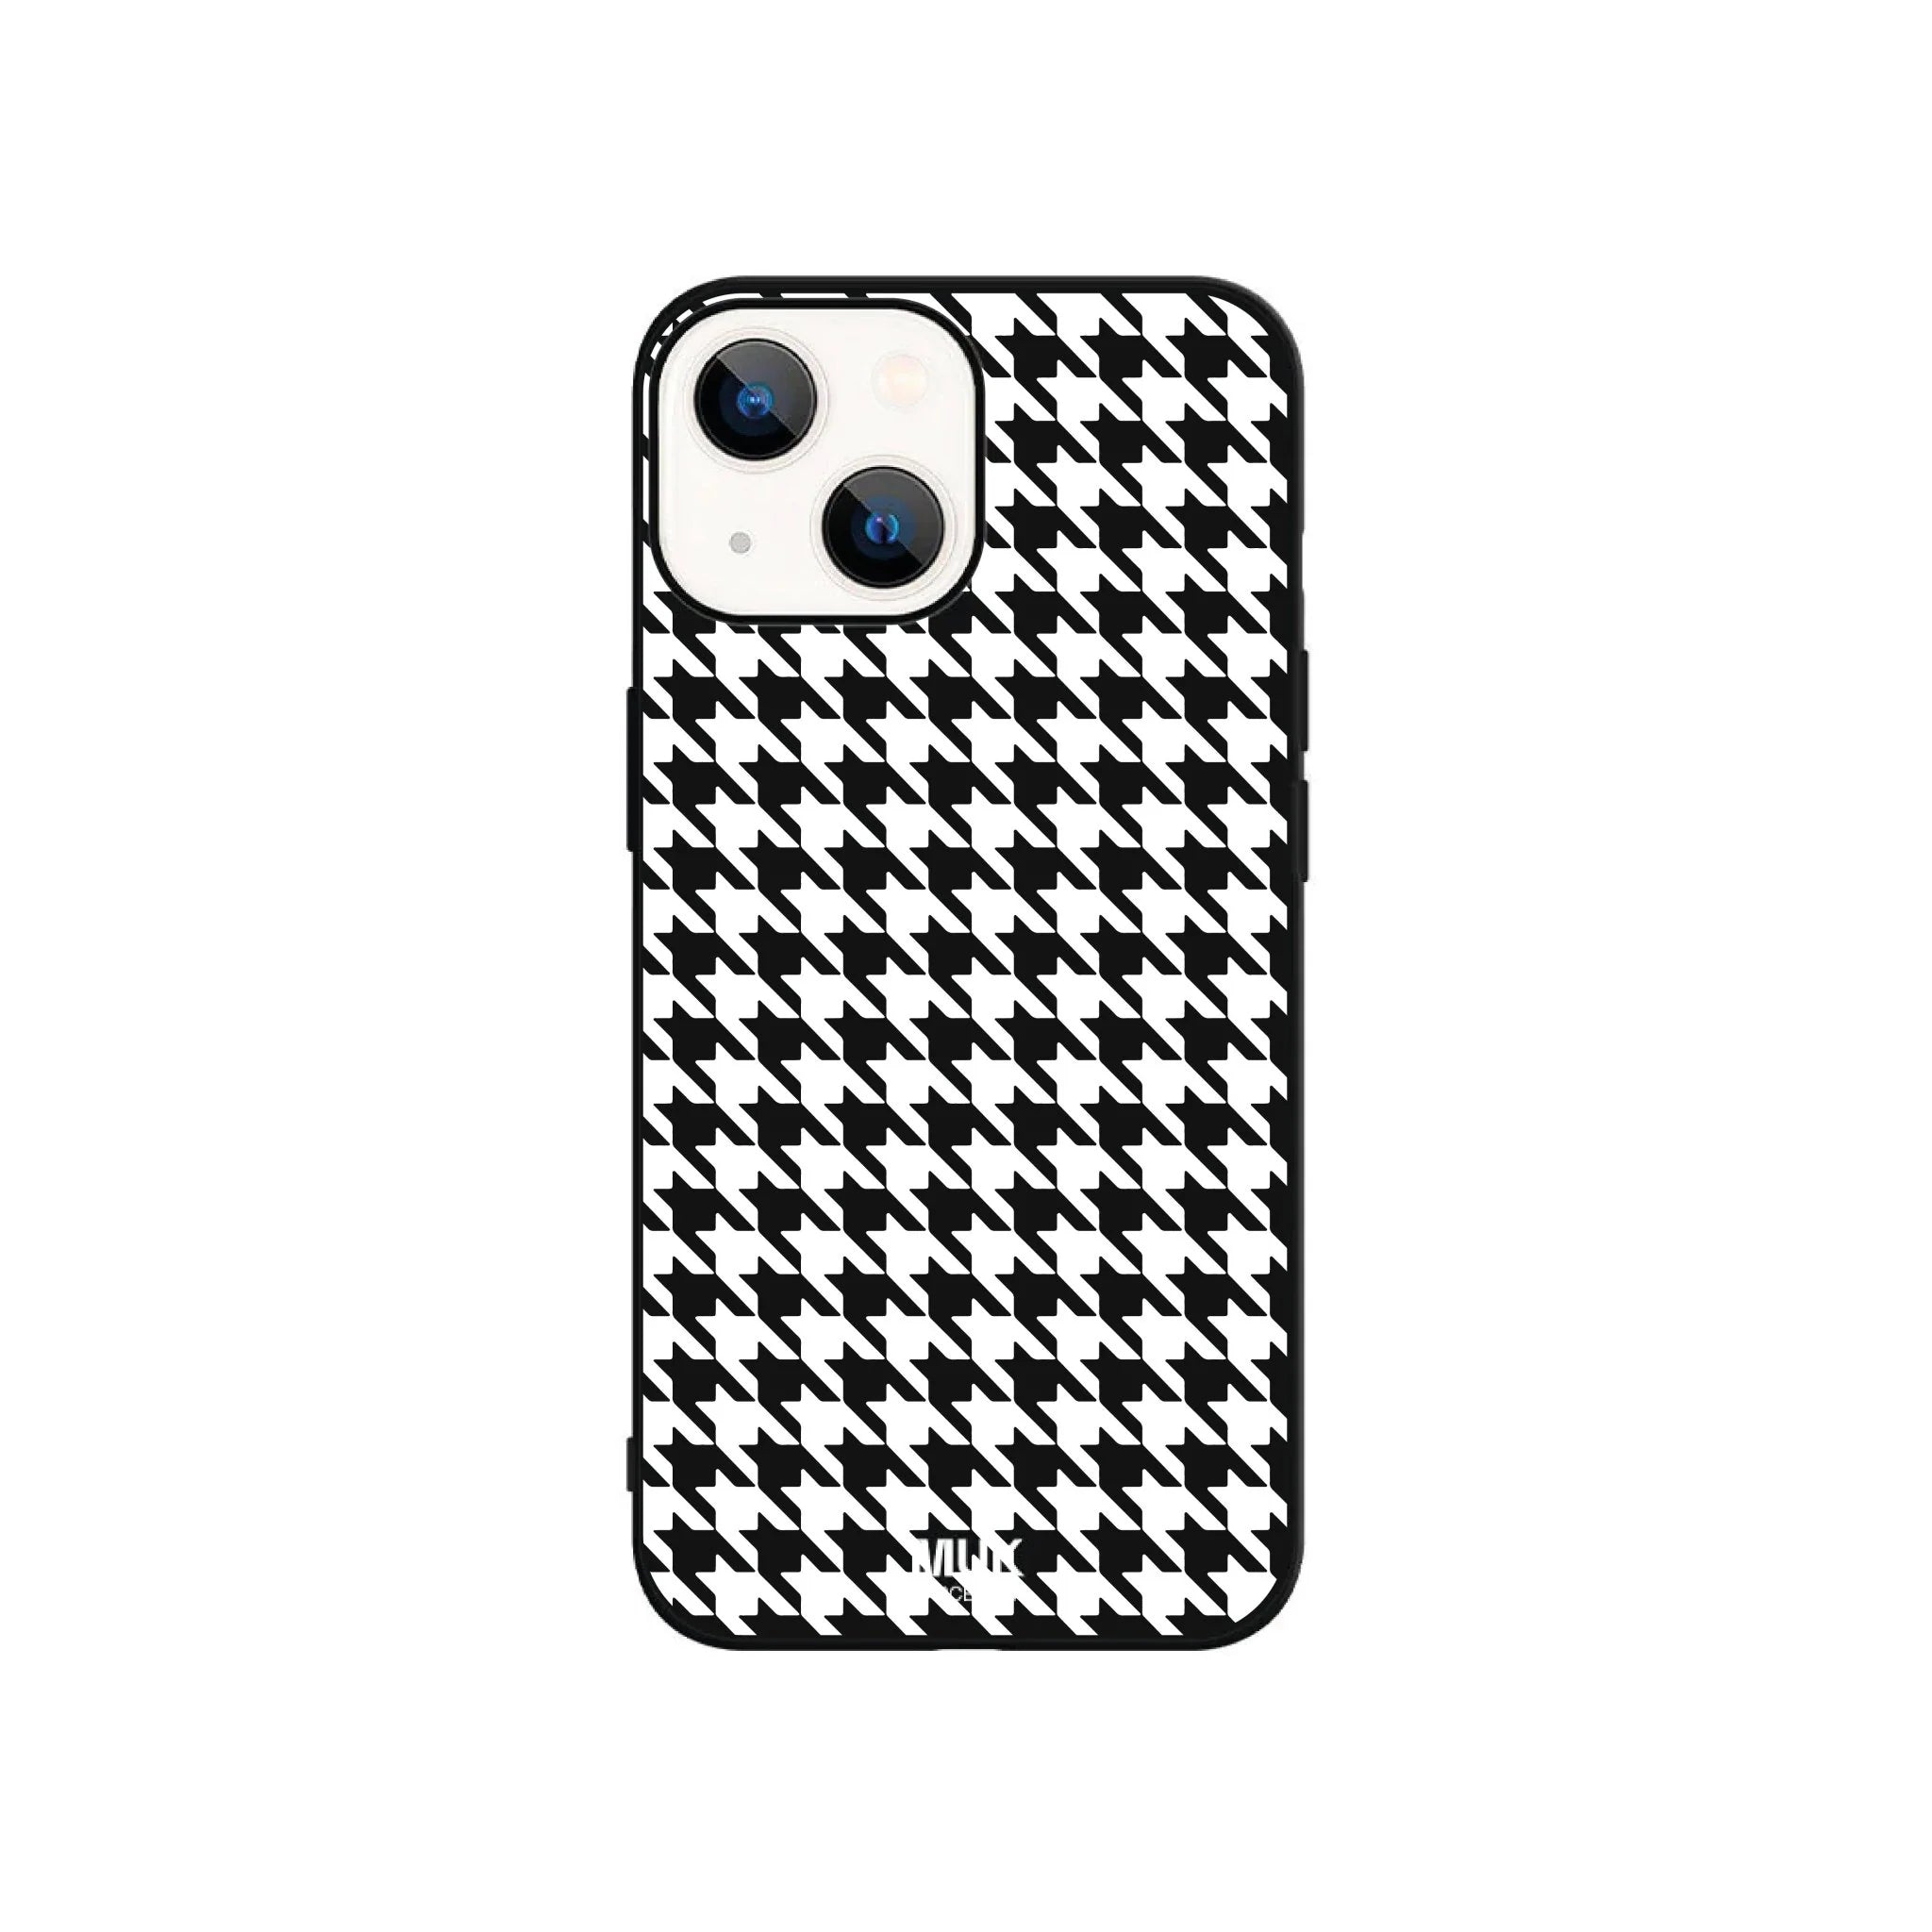 Black TPU phone case with black and white bicolor houndstooth print.
